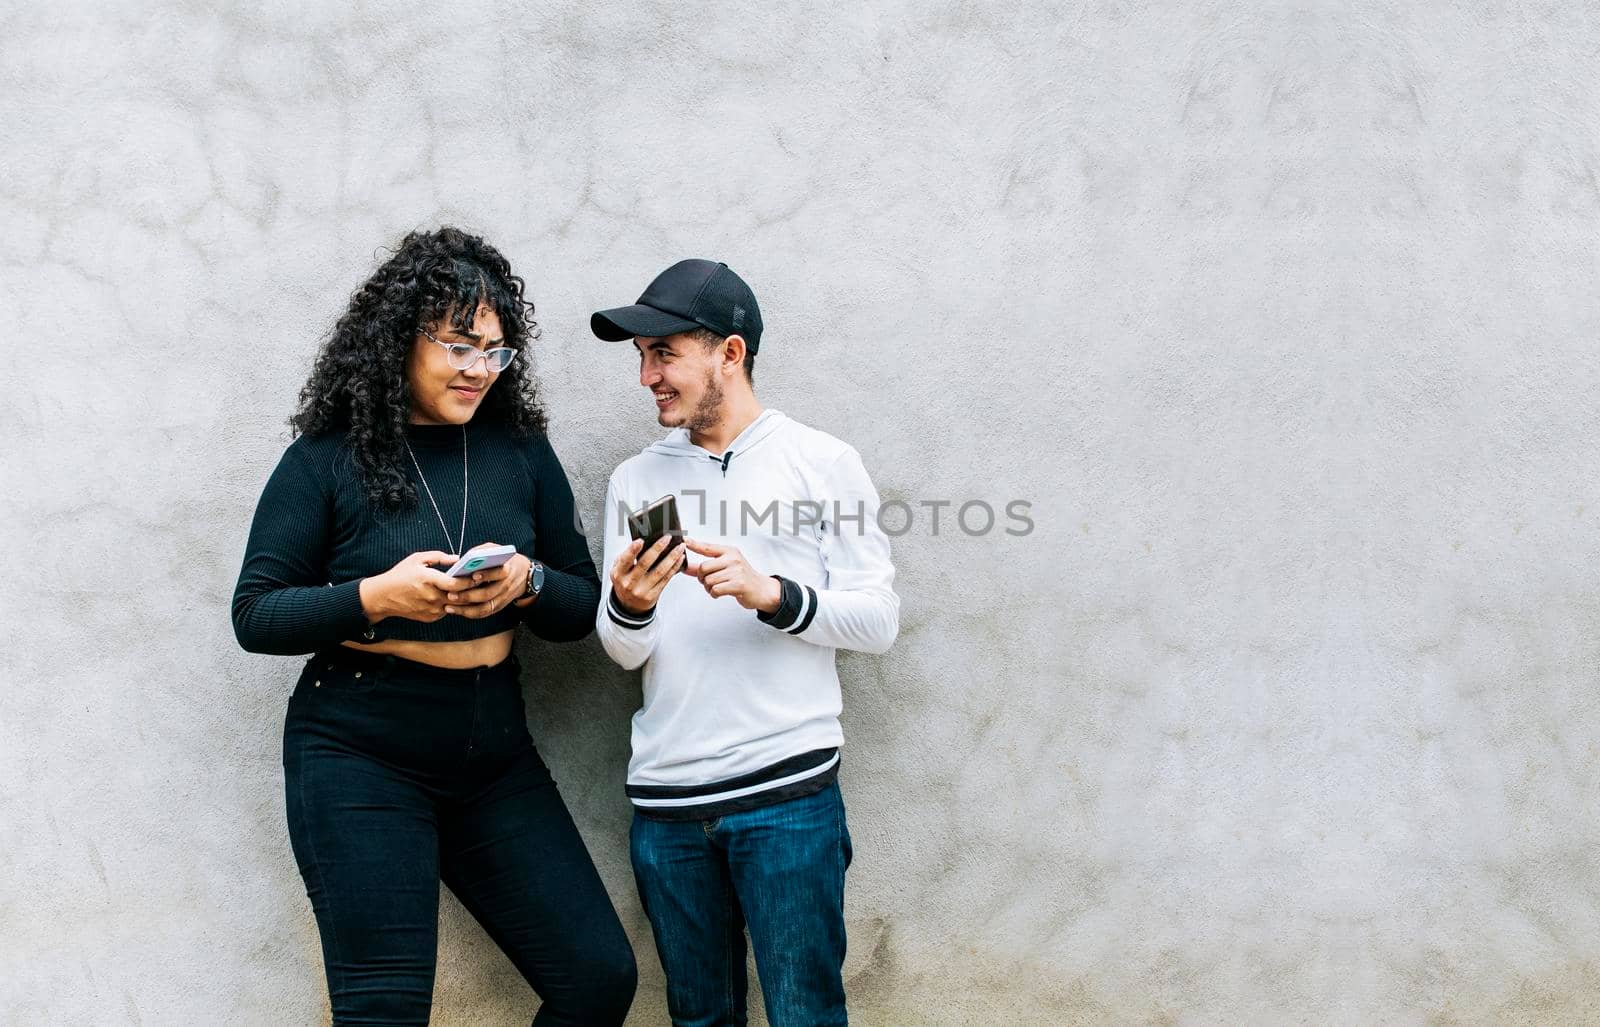 Two smiling friends checking their cell phones, Two teenage friends checking their cell phones and smiling, Two teenagers together checking their cell phones, Guy and girl leaning on a wall checking their cell phones